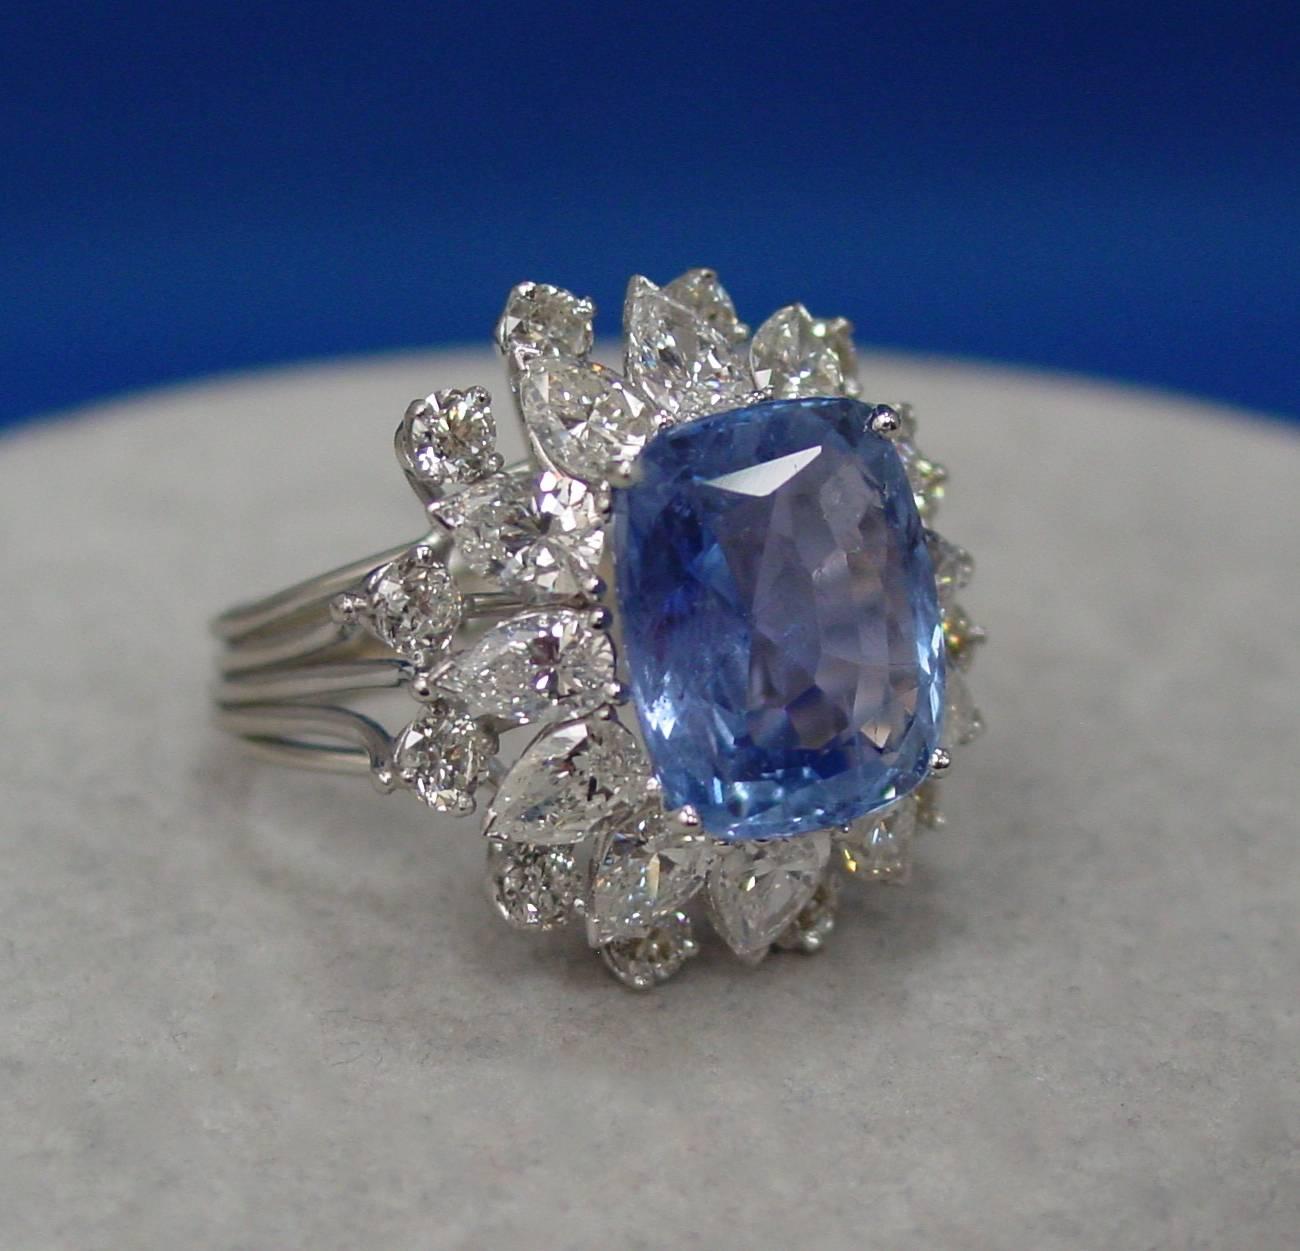 Ceylon sapphire and diamond ring featuring an exquisite antique cushion shaped sapphire weighing 11.06 carats. The sapphire is complemented by pear and round shaped diamonds weighing approximately 6.75 carats in a modern platinum setting. With AGL